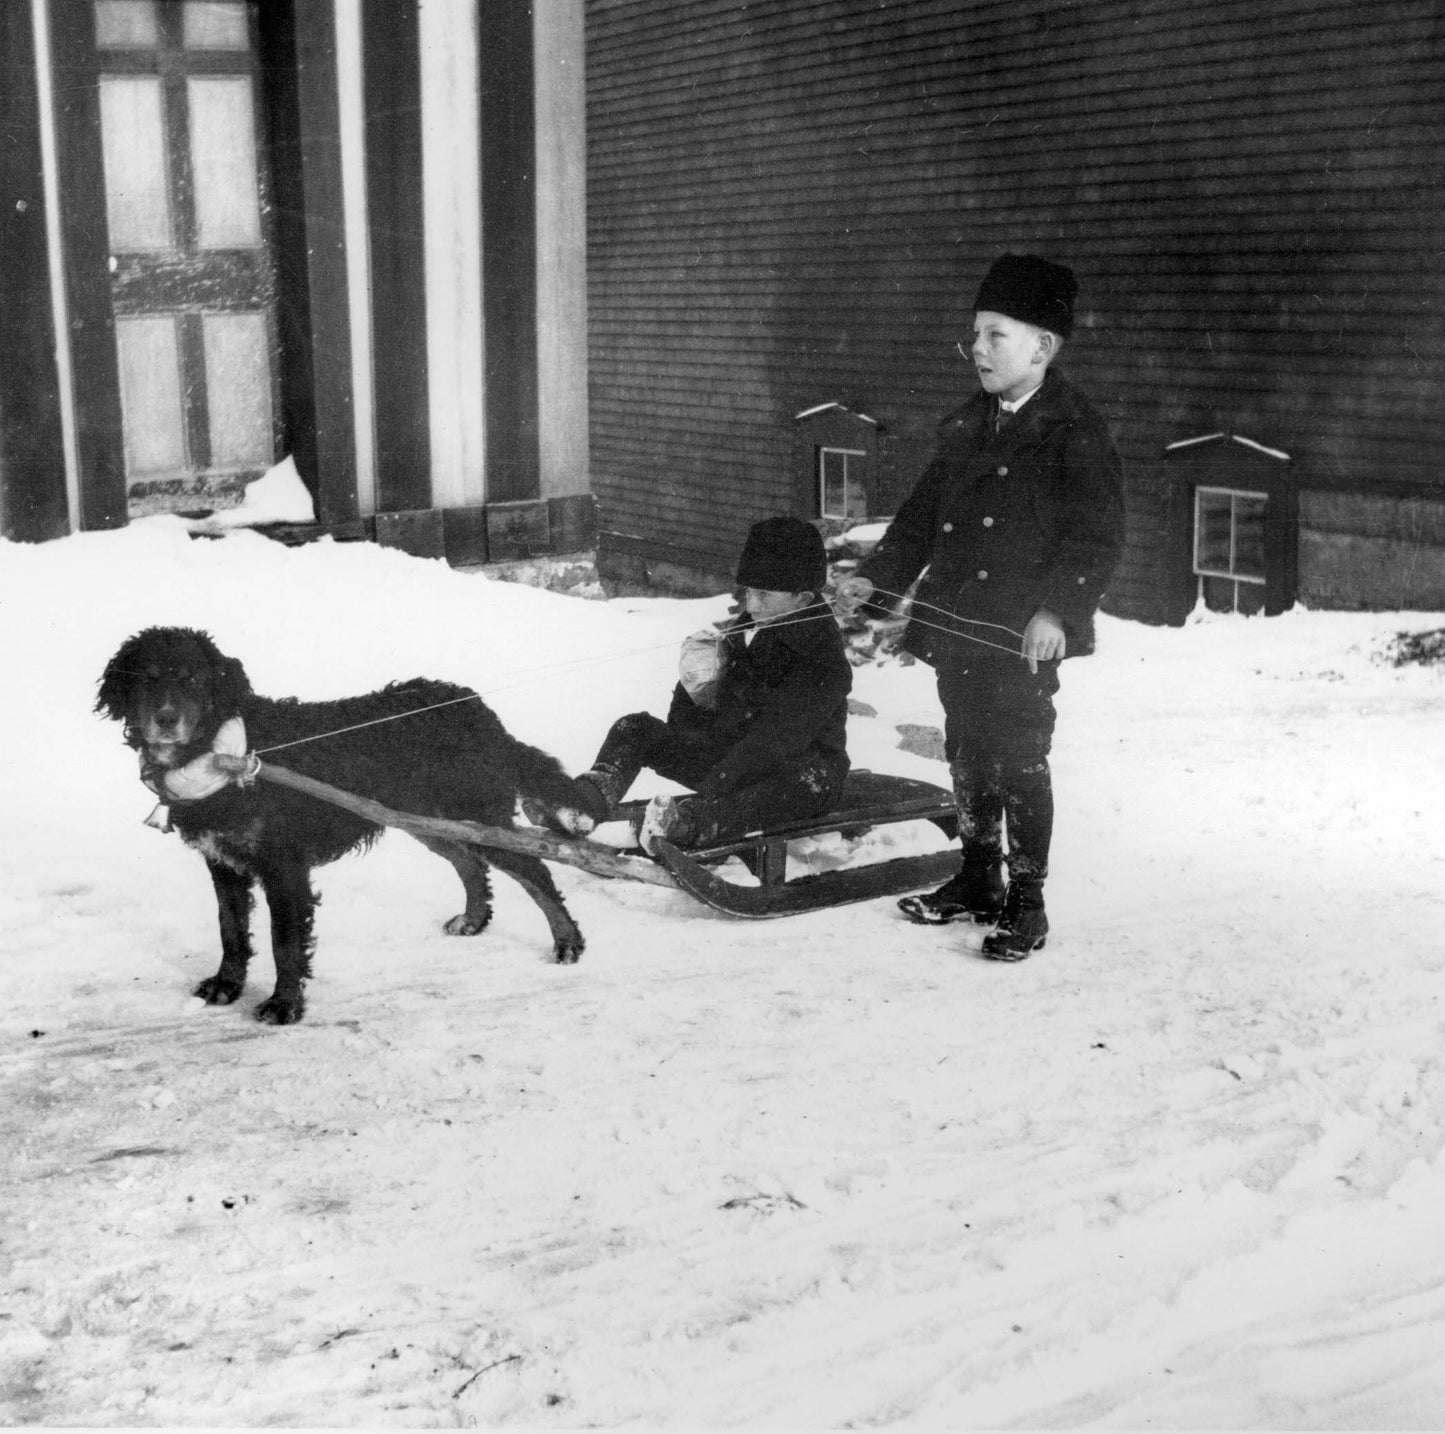 Two boys outdoors in winter; one is seated on a sled pulled by a dog